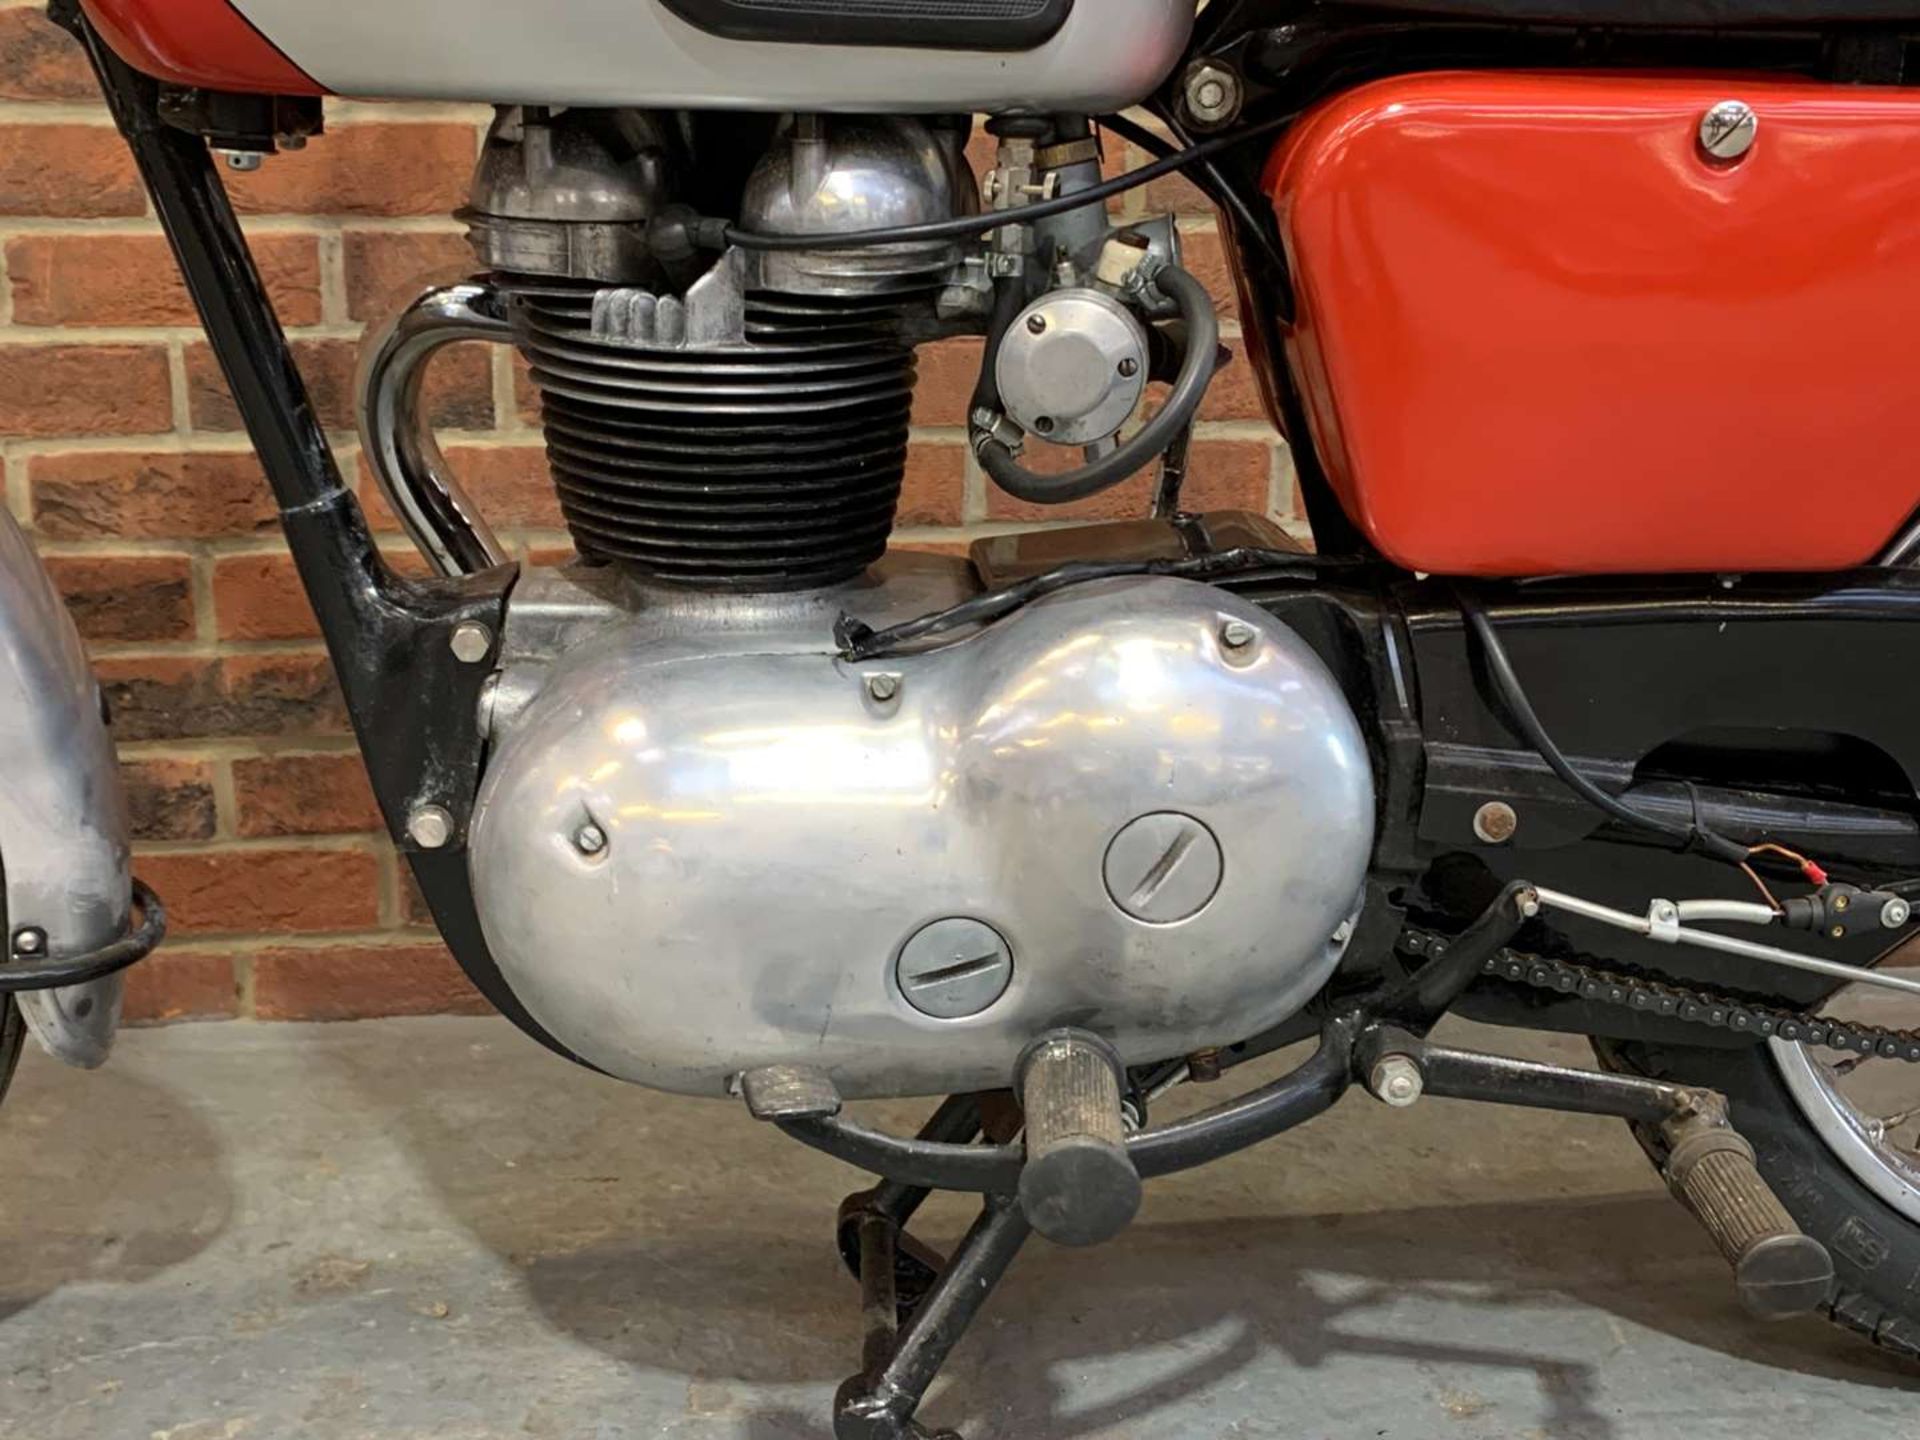 1961 MATCHLESS G2 248CC - Image 7 of 17